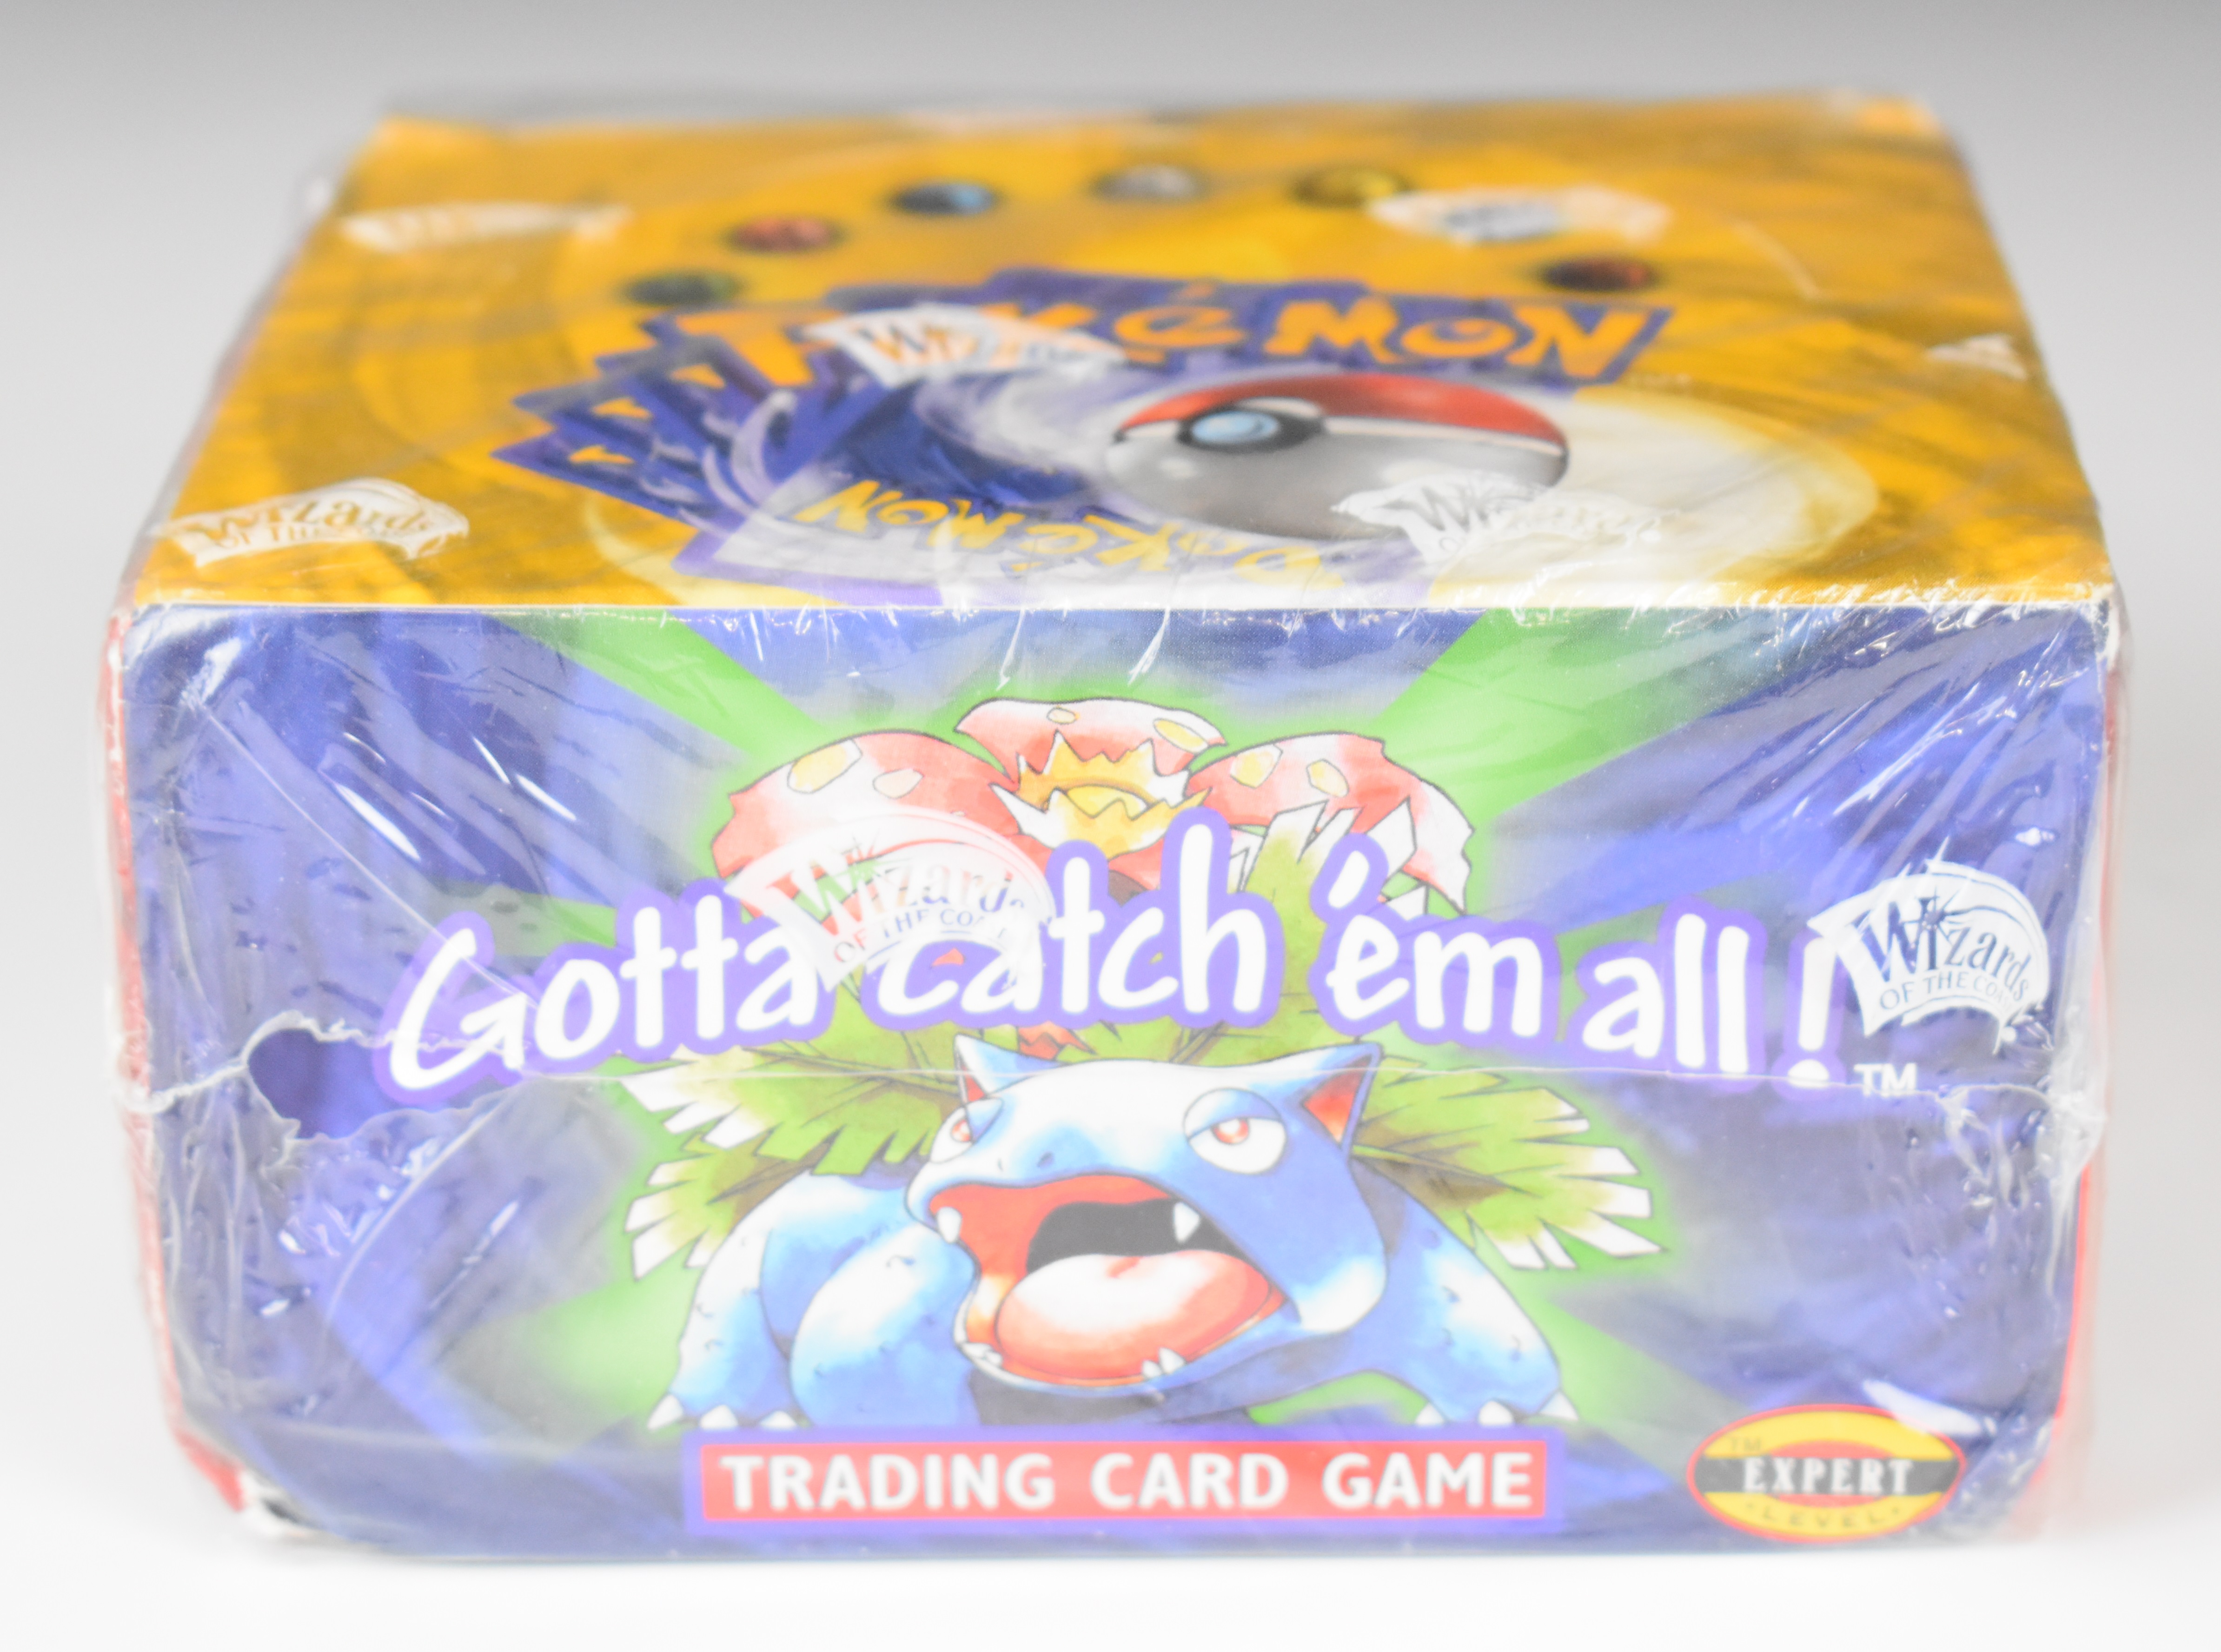 Pokémon TCG Base Set Booster Box, 4th edition by Wizards of the Coast (1999-2000), with made in UK - Image 2 of 9